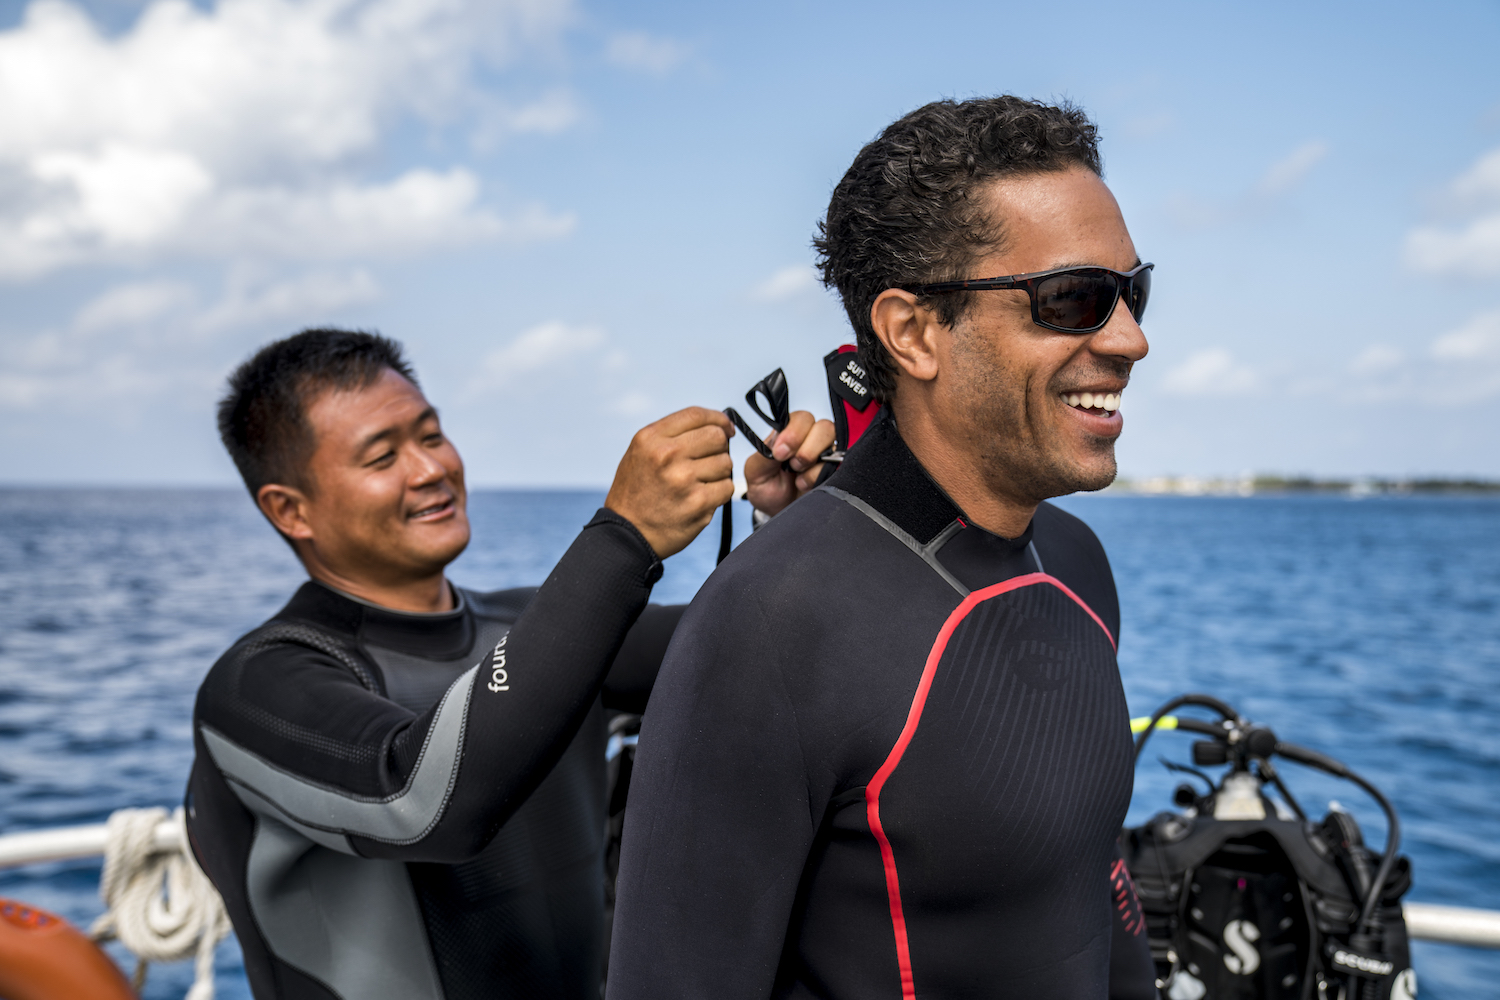 a diver helps another diver zip up a wetsuit